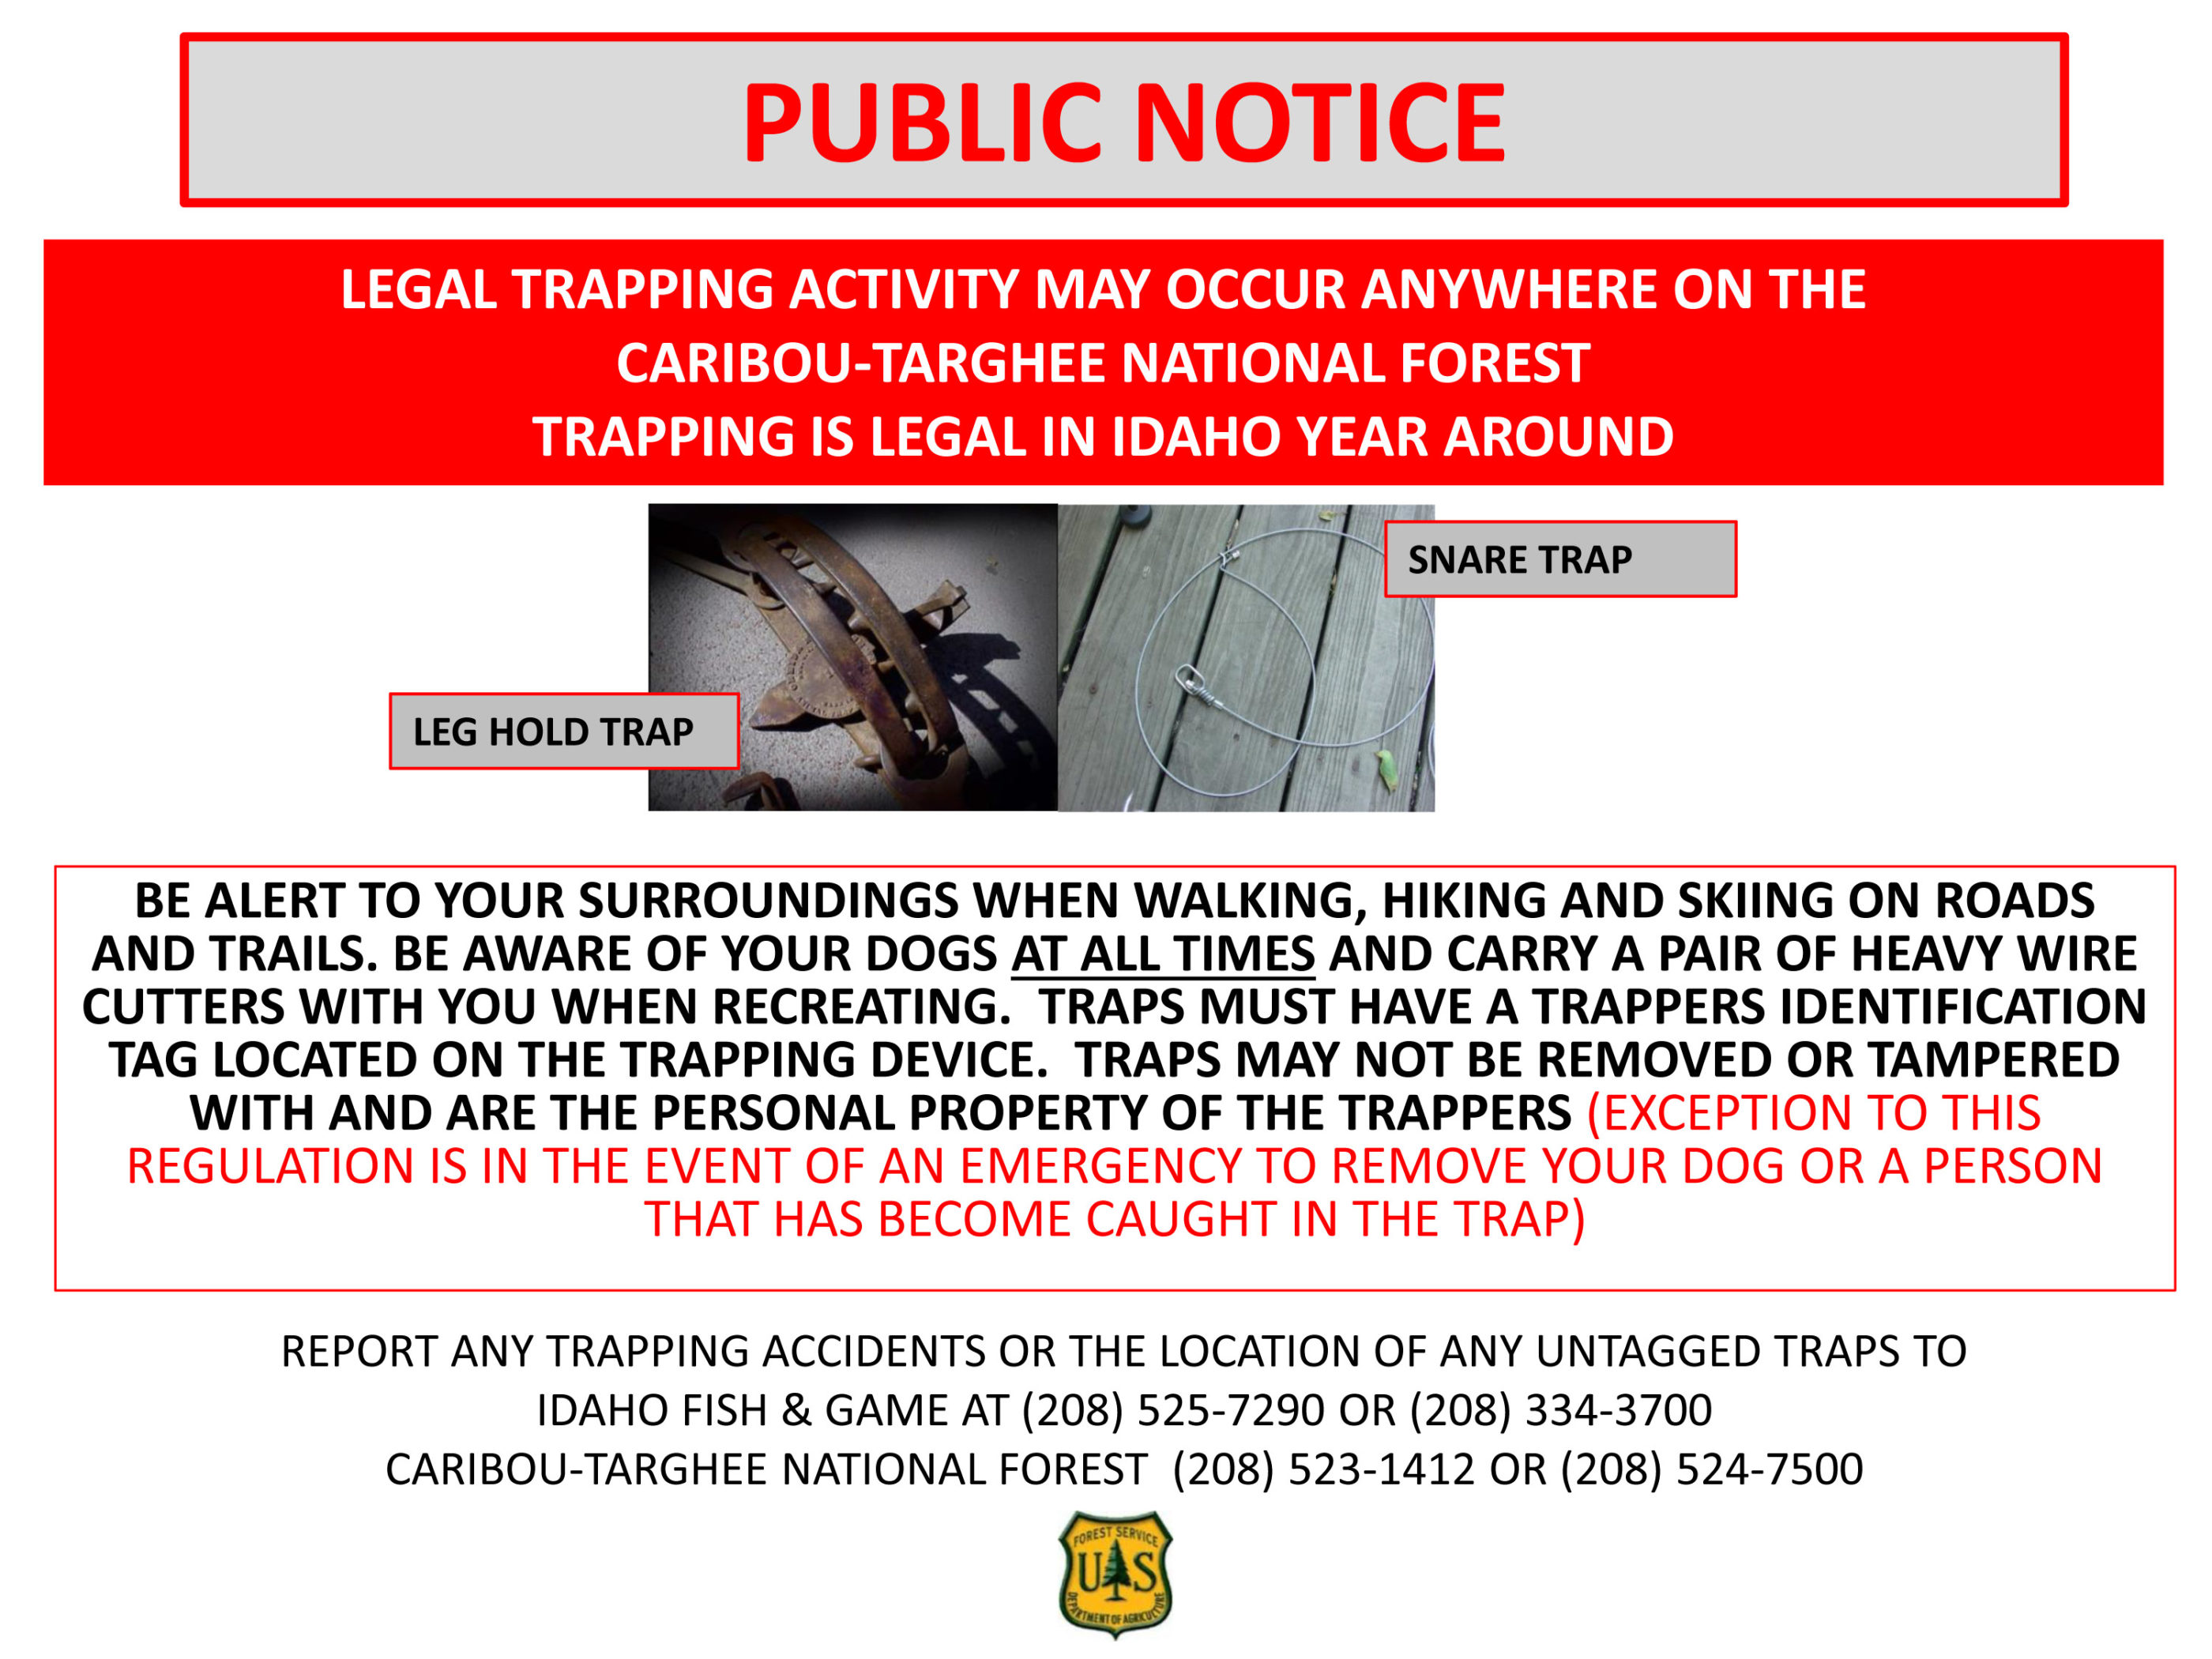 https://wyominguntrapped.org/wp-content/uploads/2014/04/Trapping_PUBLIC_NOTICE-1-scaled.jpg